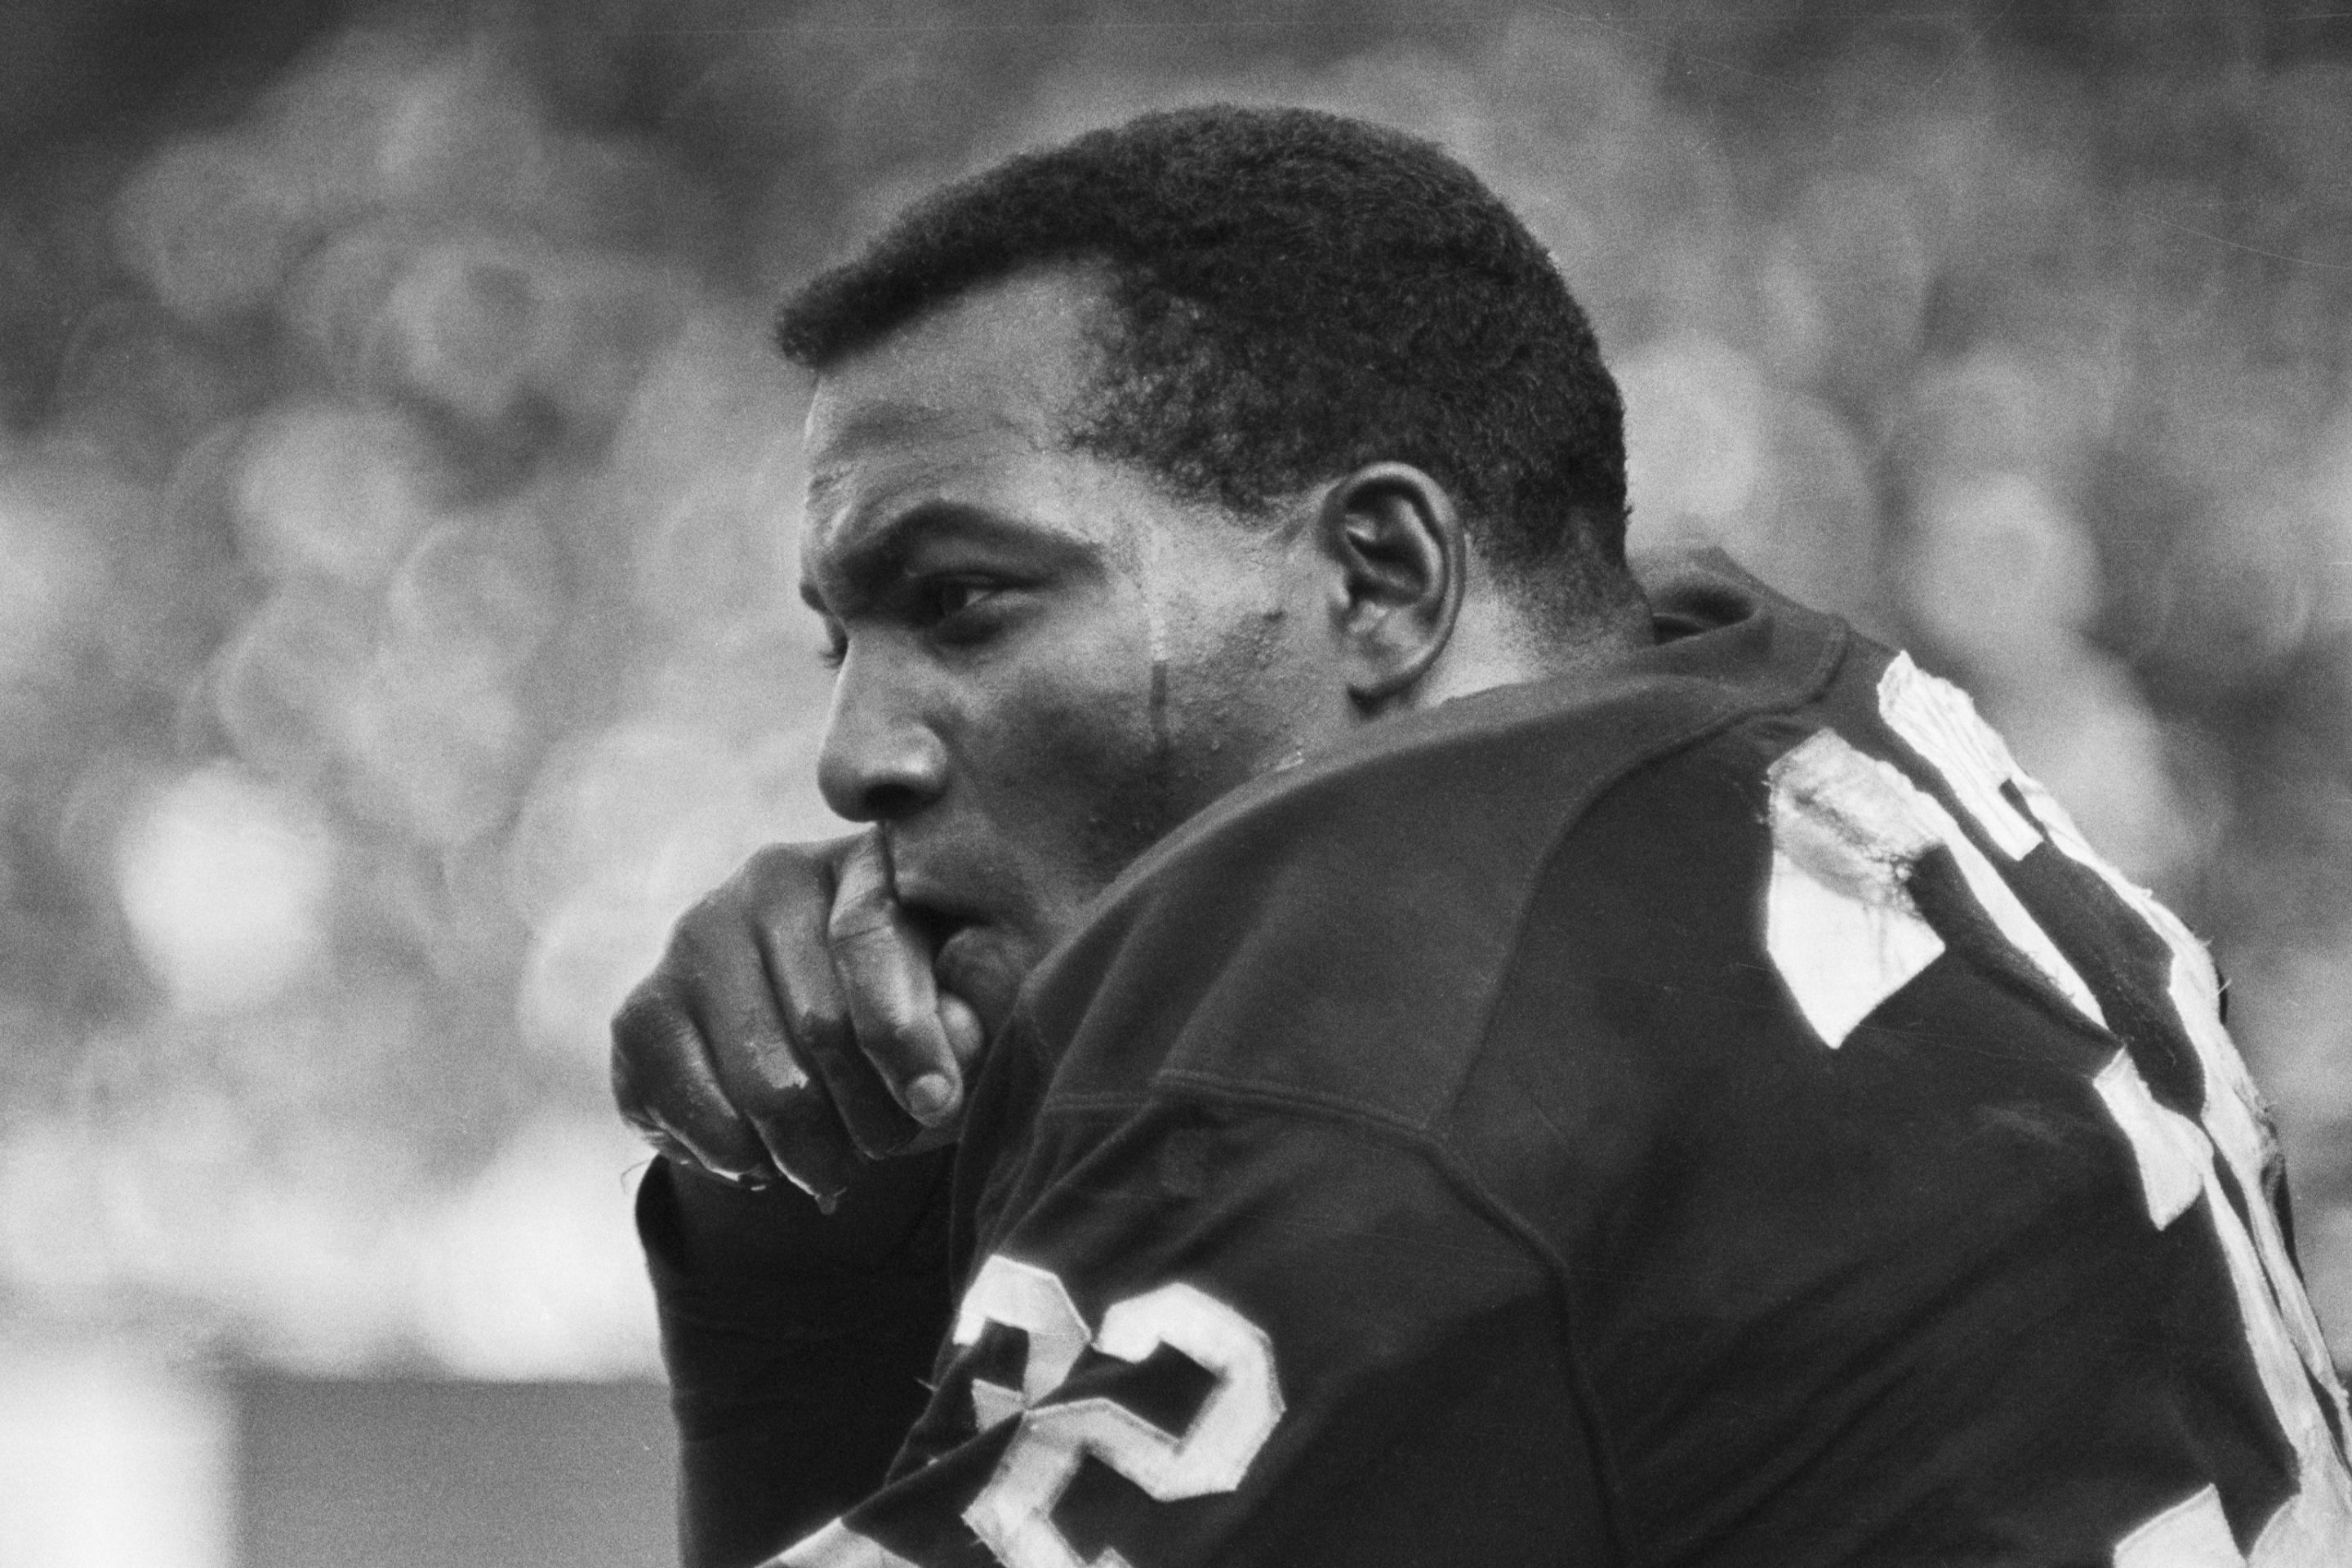 A black and white photo of a young Jim Brown, when he played for the Cleveland Browns. It shows Brown sitting on a bench, with fans off in the blurry distance.